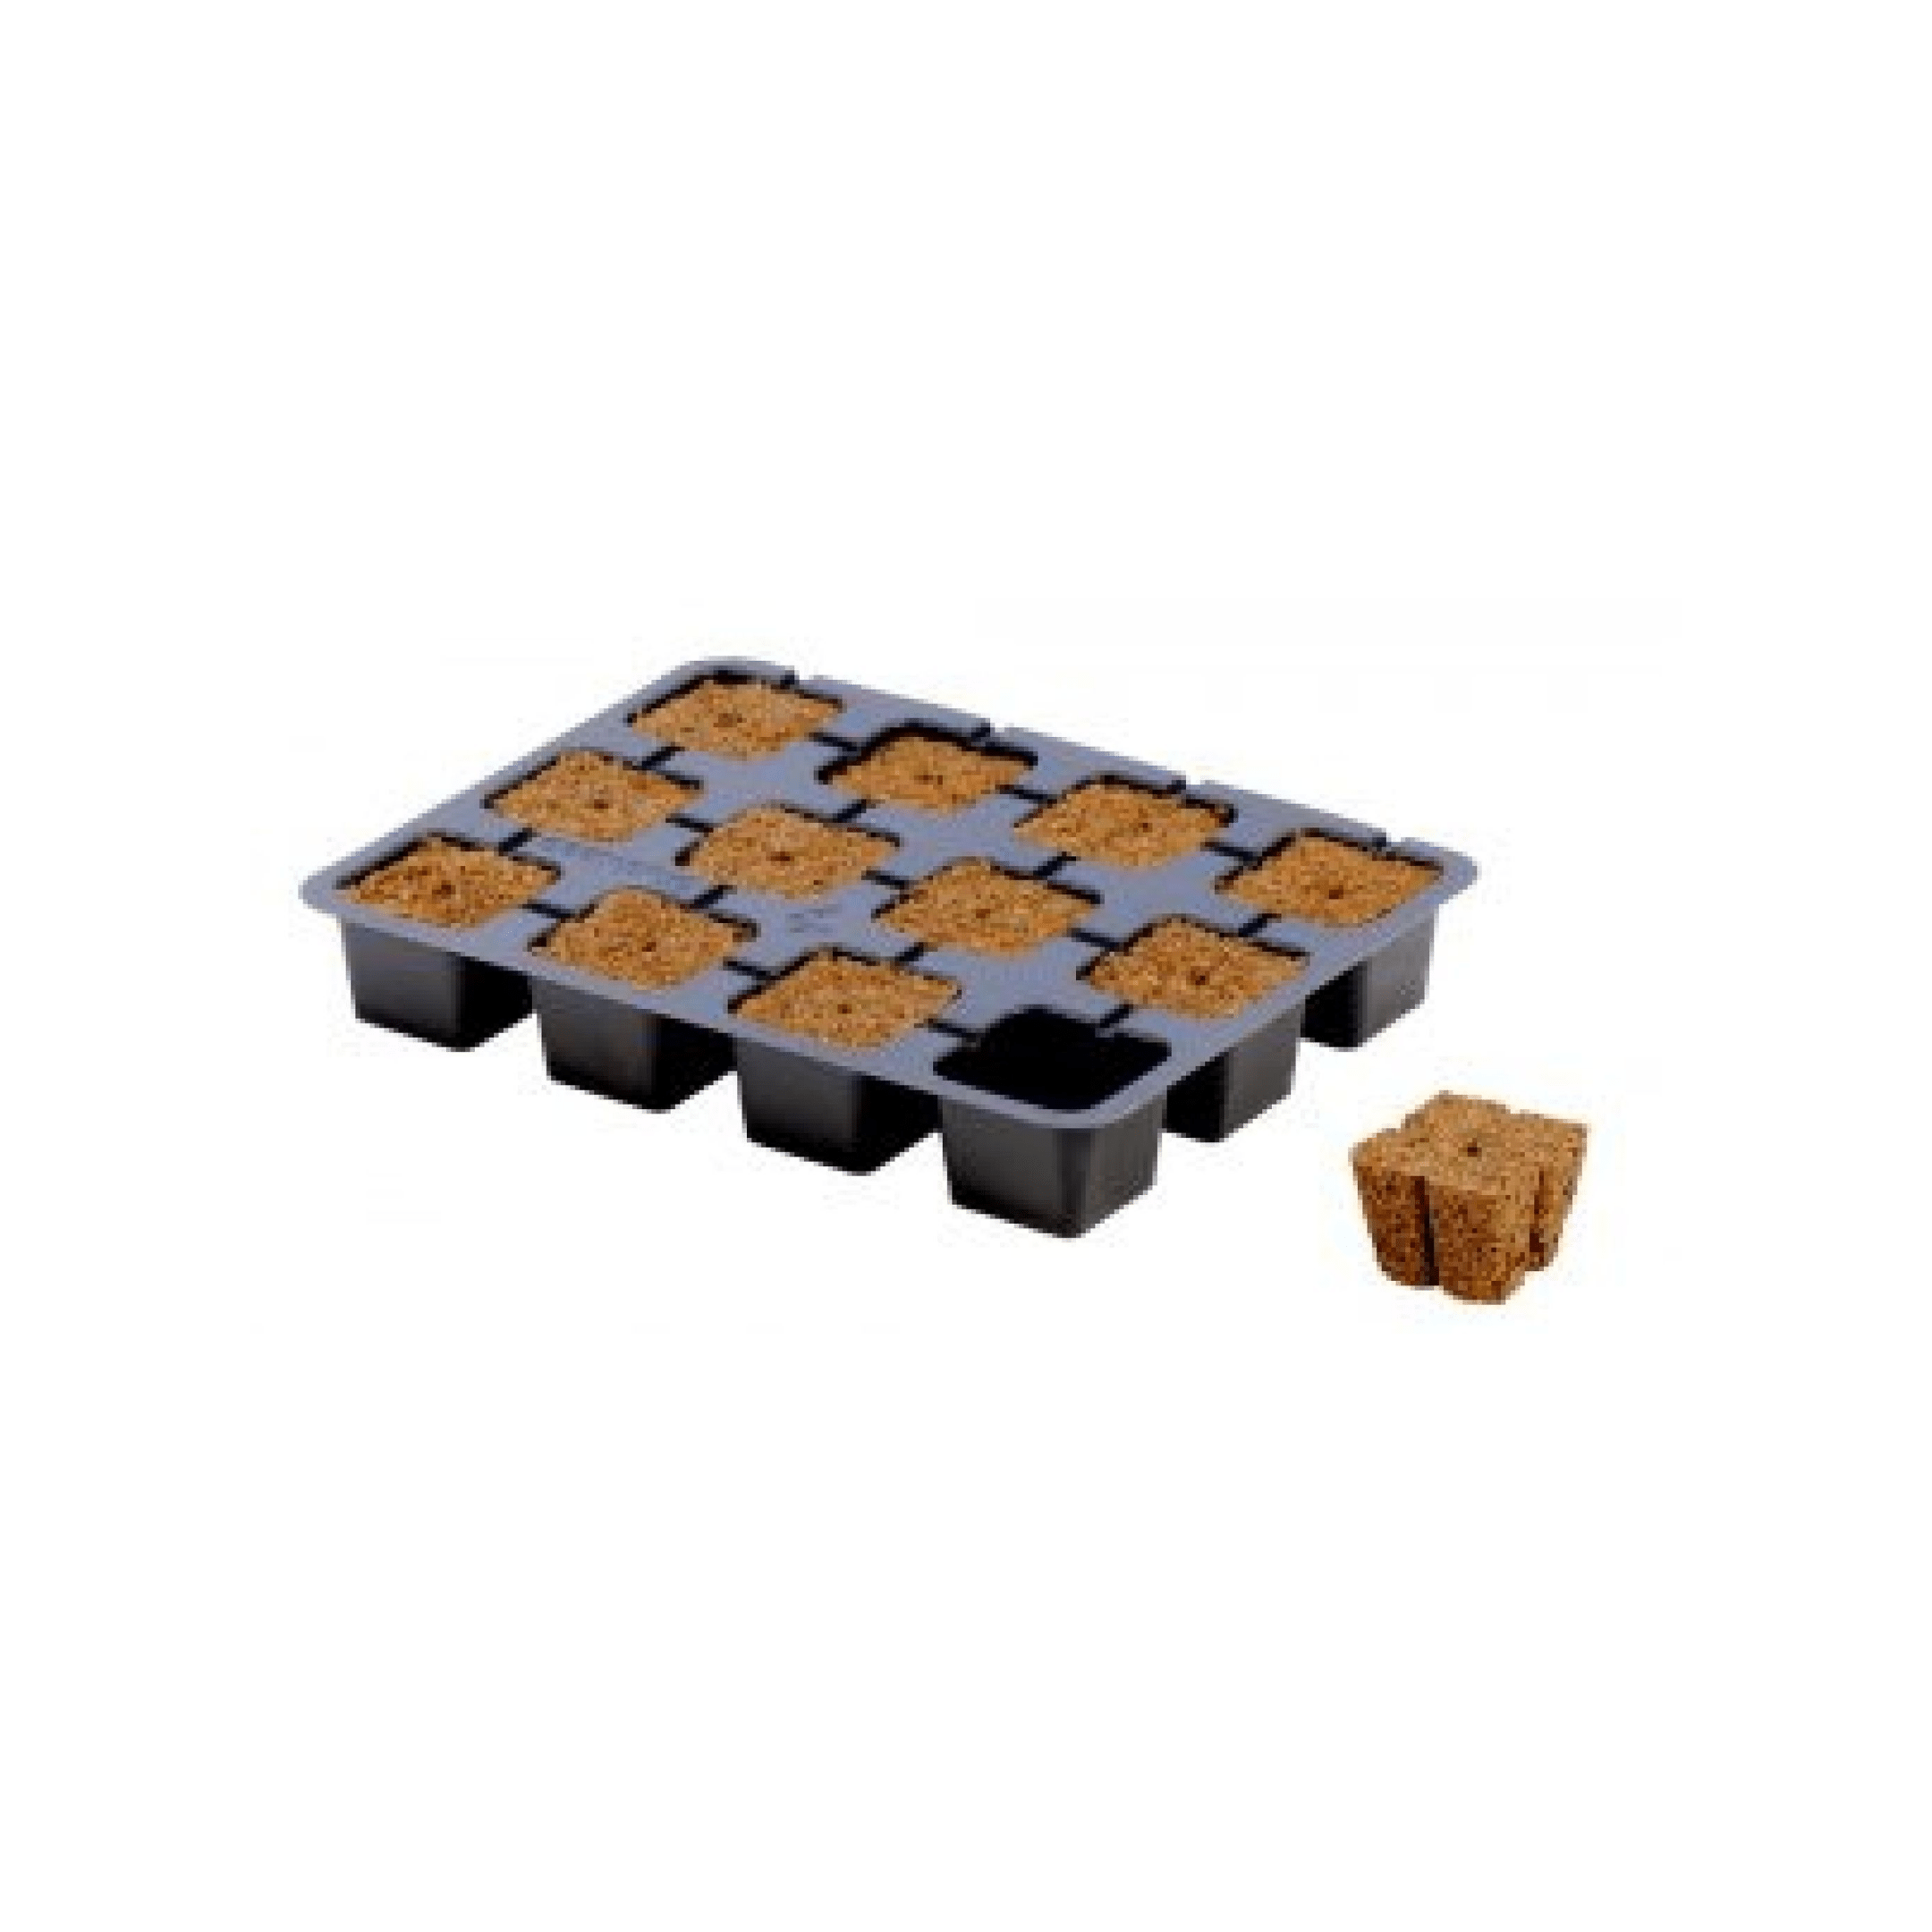 Eazy Plug Gardening Accessories > Propagation Tools > Rooting Cubes & Rockwool 12 pack Eazy Plug Rooting Cubes (12 / 24 / 77 / 104 Packs)